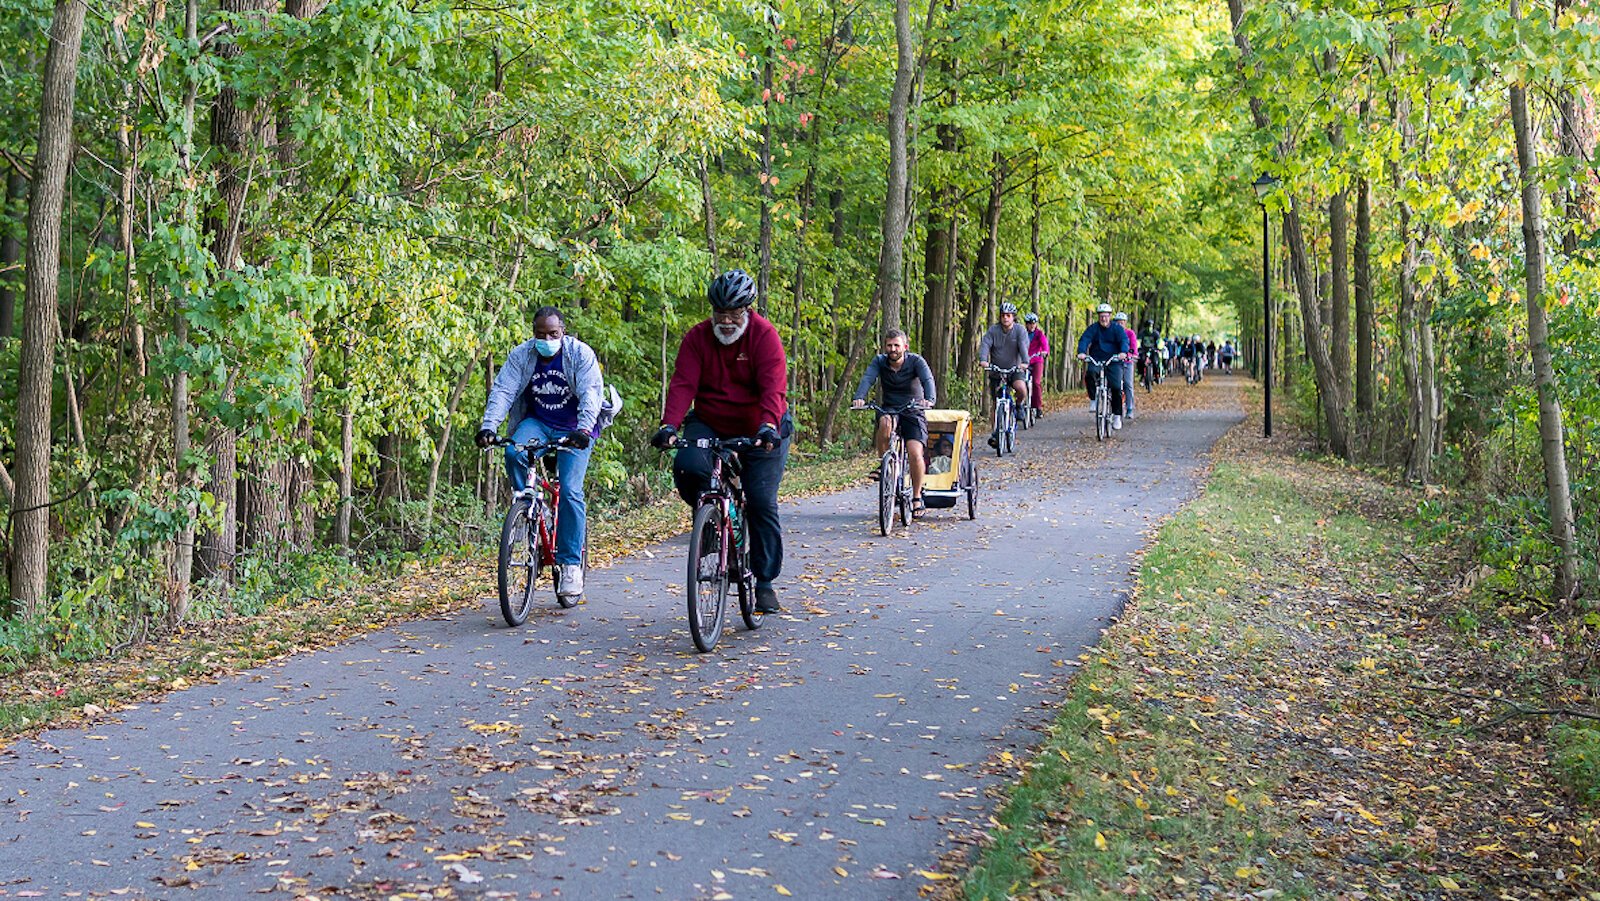 The City of Fort Wayne, New Haven, and Fort Wayne Trails host weekly family-friendly bike rides on Tuesday nights called Trek the Trails. 